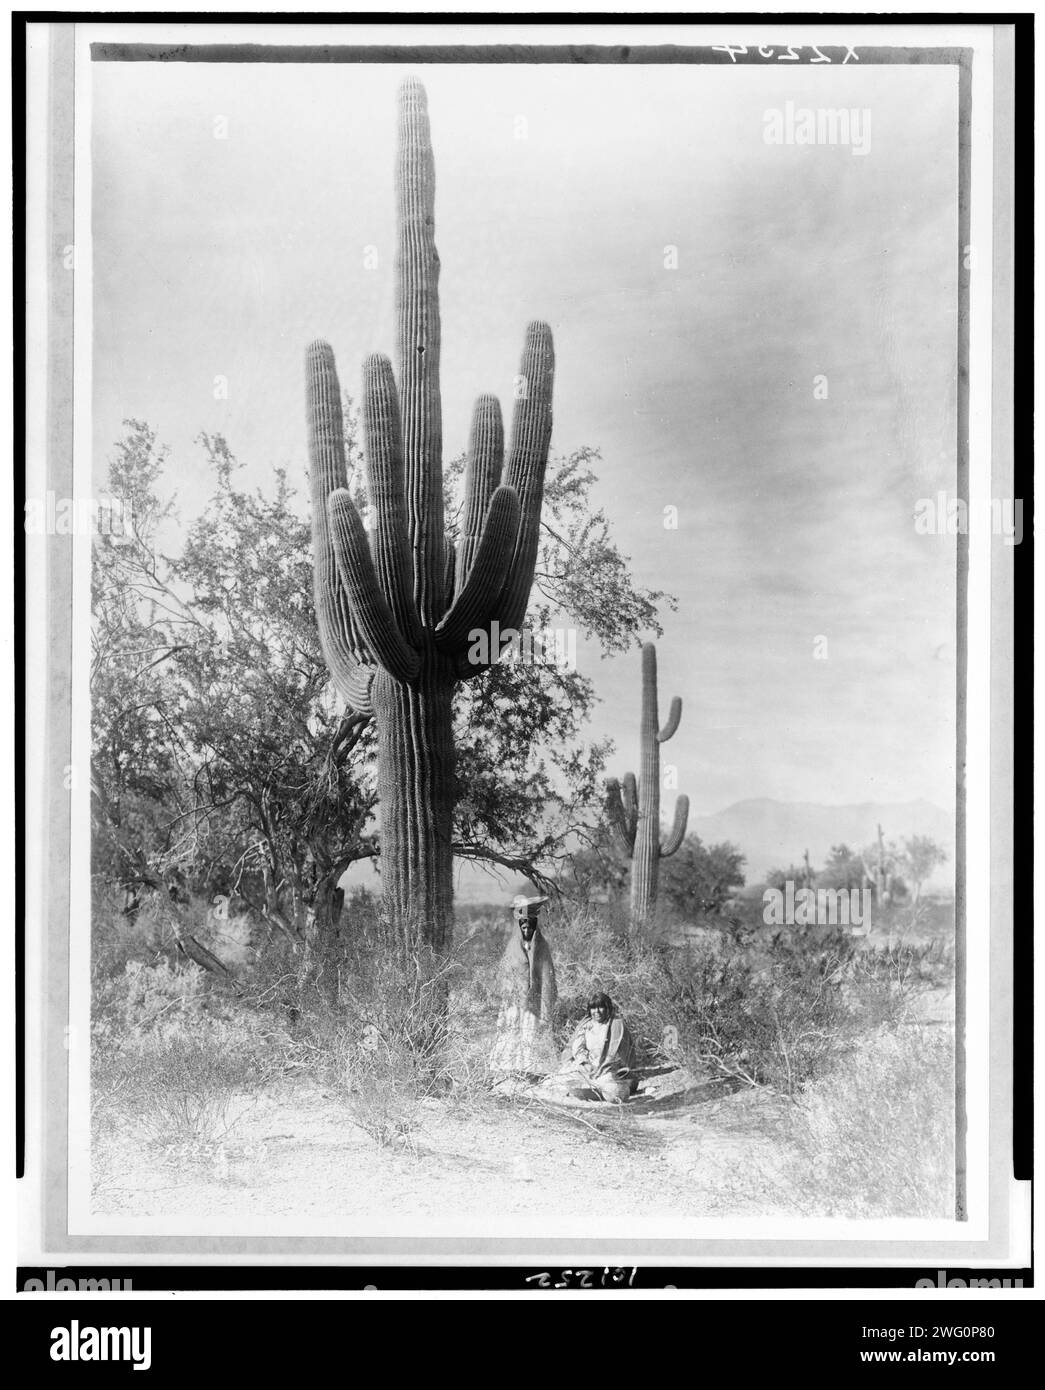 Gathering saguaro fruit, 1907, c1907. Two Pina women harvesting saguaro cactus fruit, Arizona, one seated on ground at base of tall cactus, the other standing with basket tray on head. Stock Photo